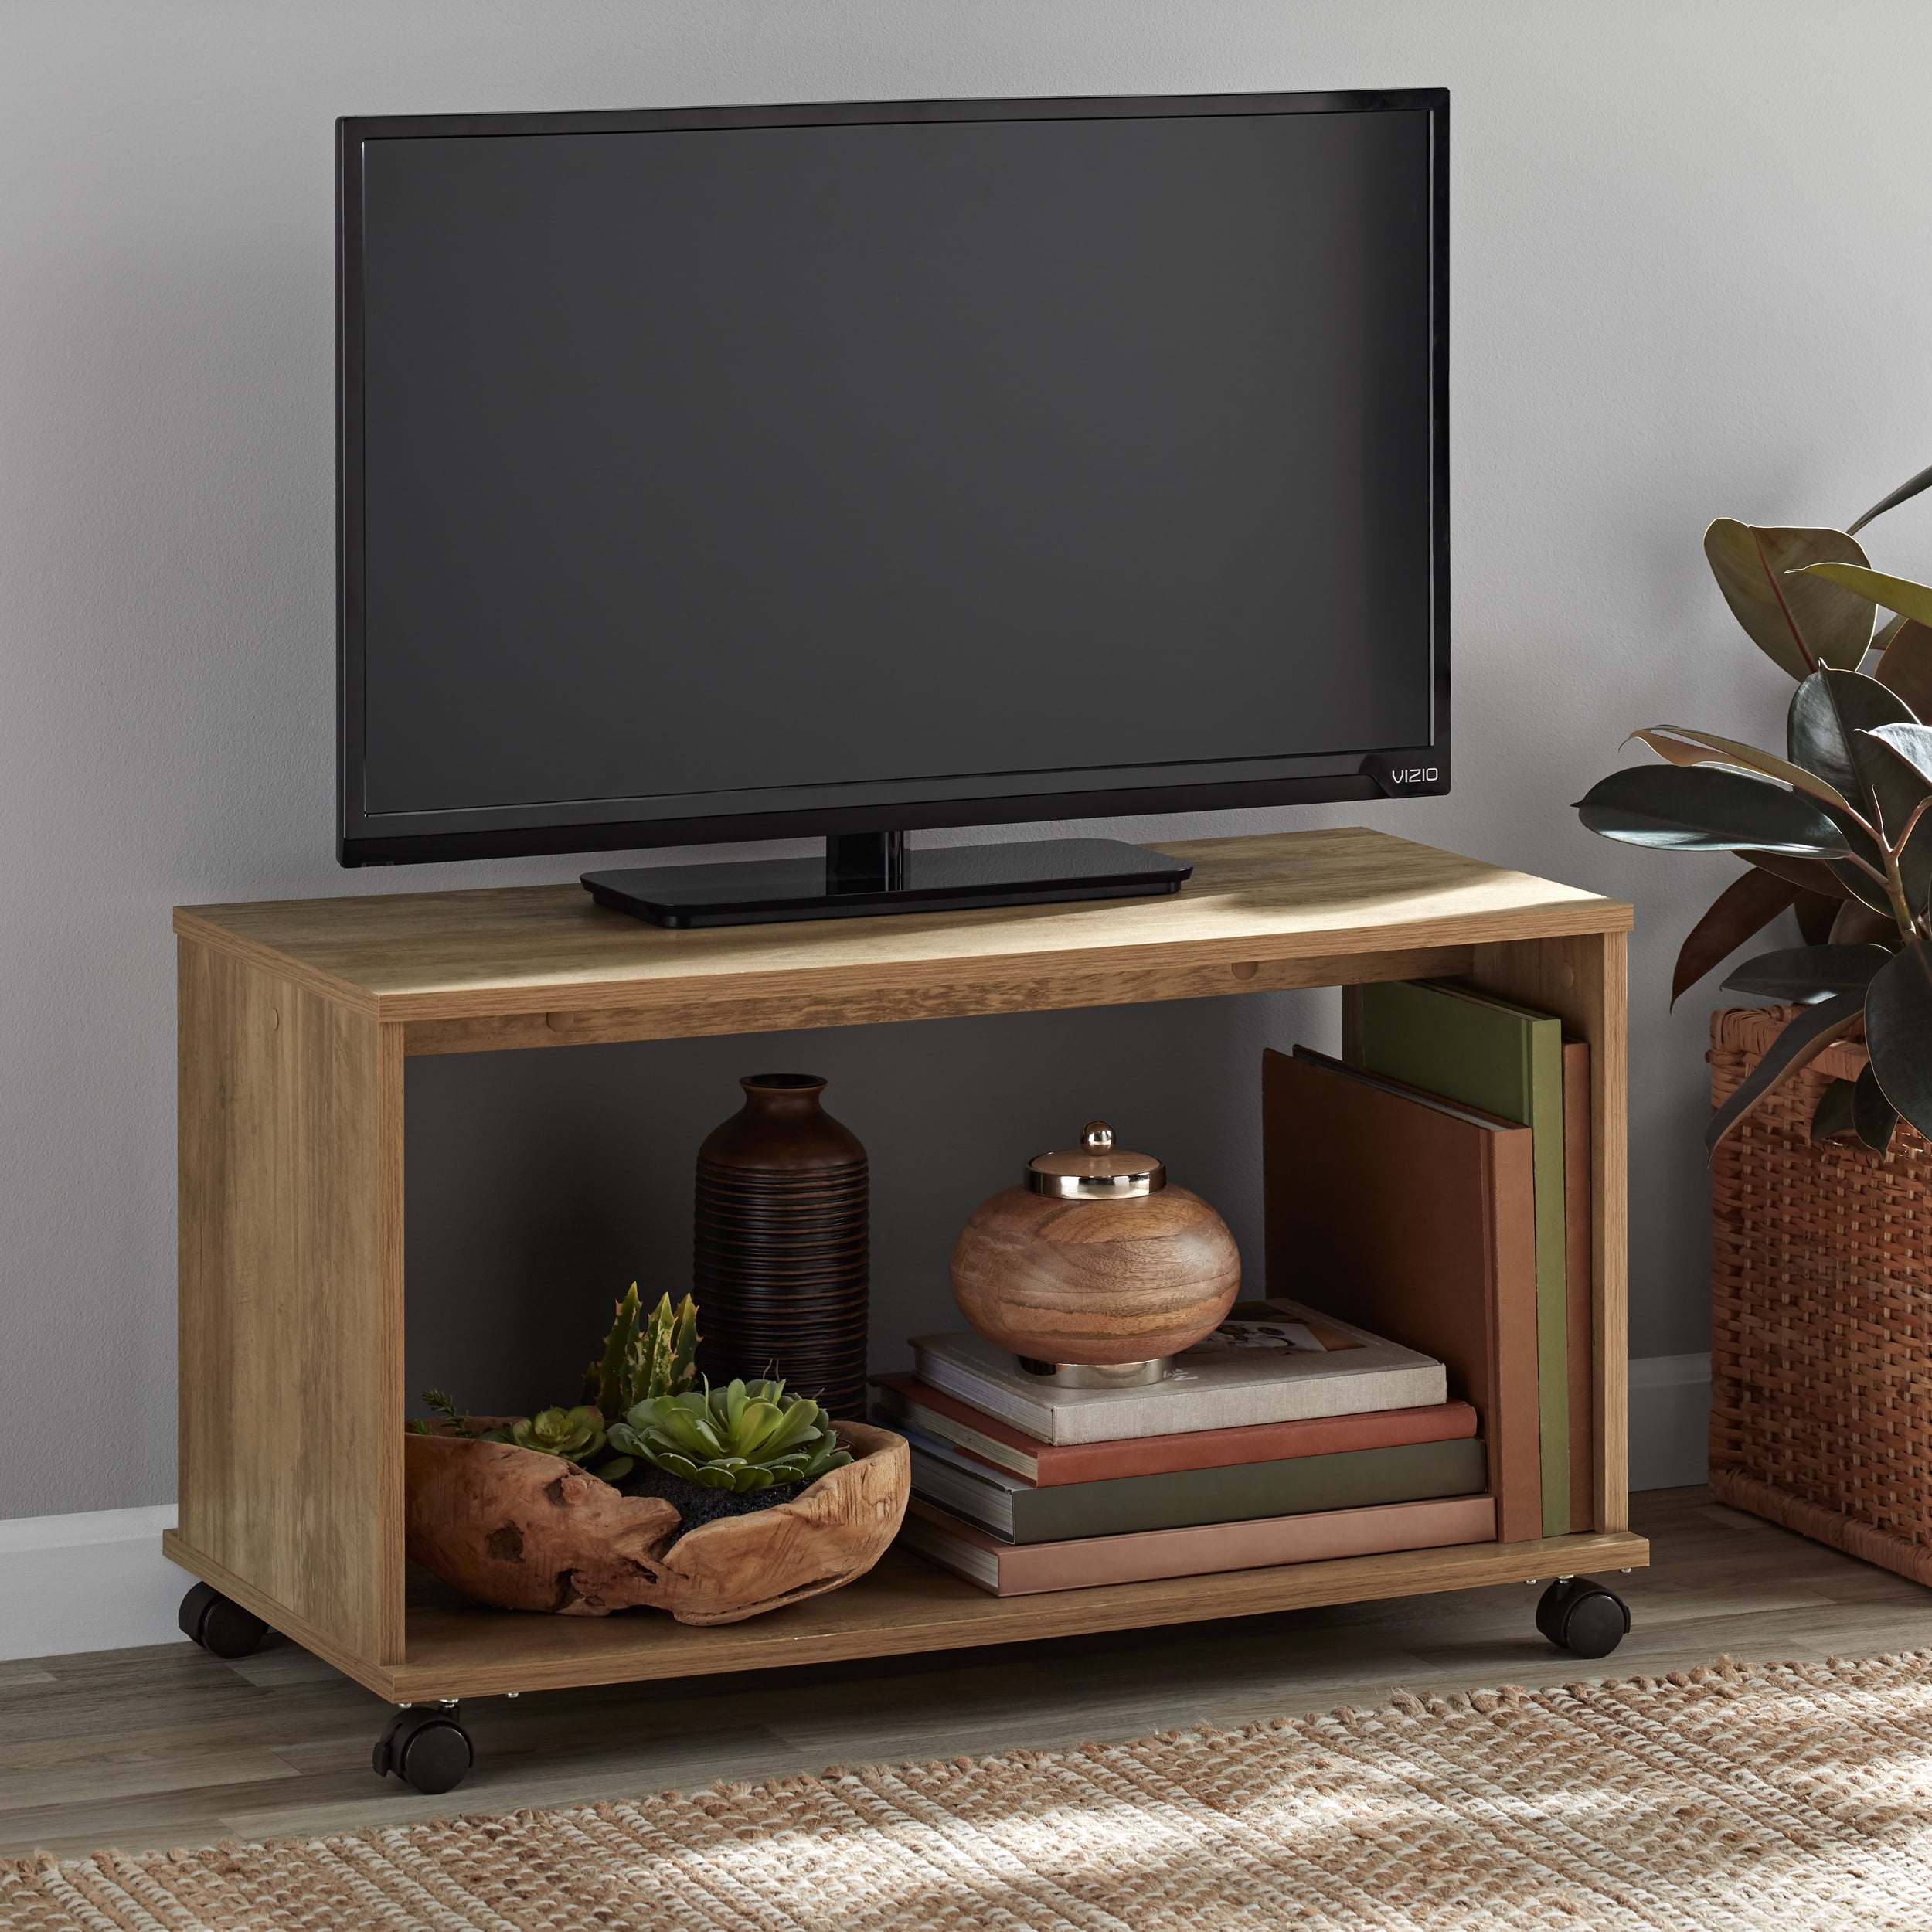 Mainstays TV Cart for Flatscreen TVs up to 32", Rustic Weathered Oak Finish